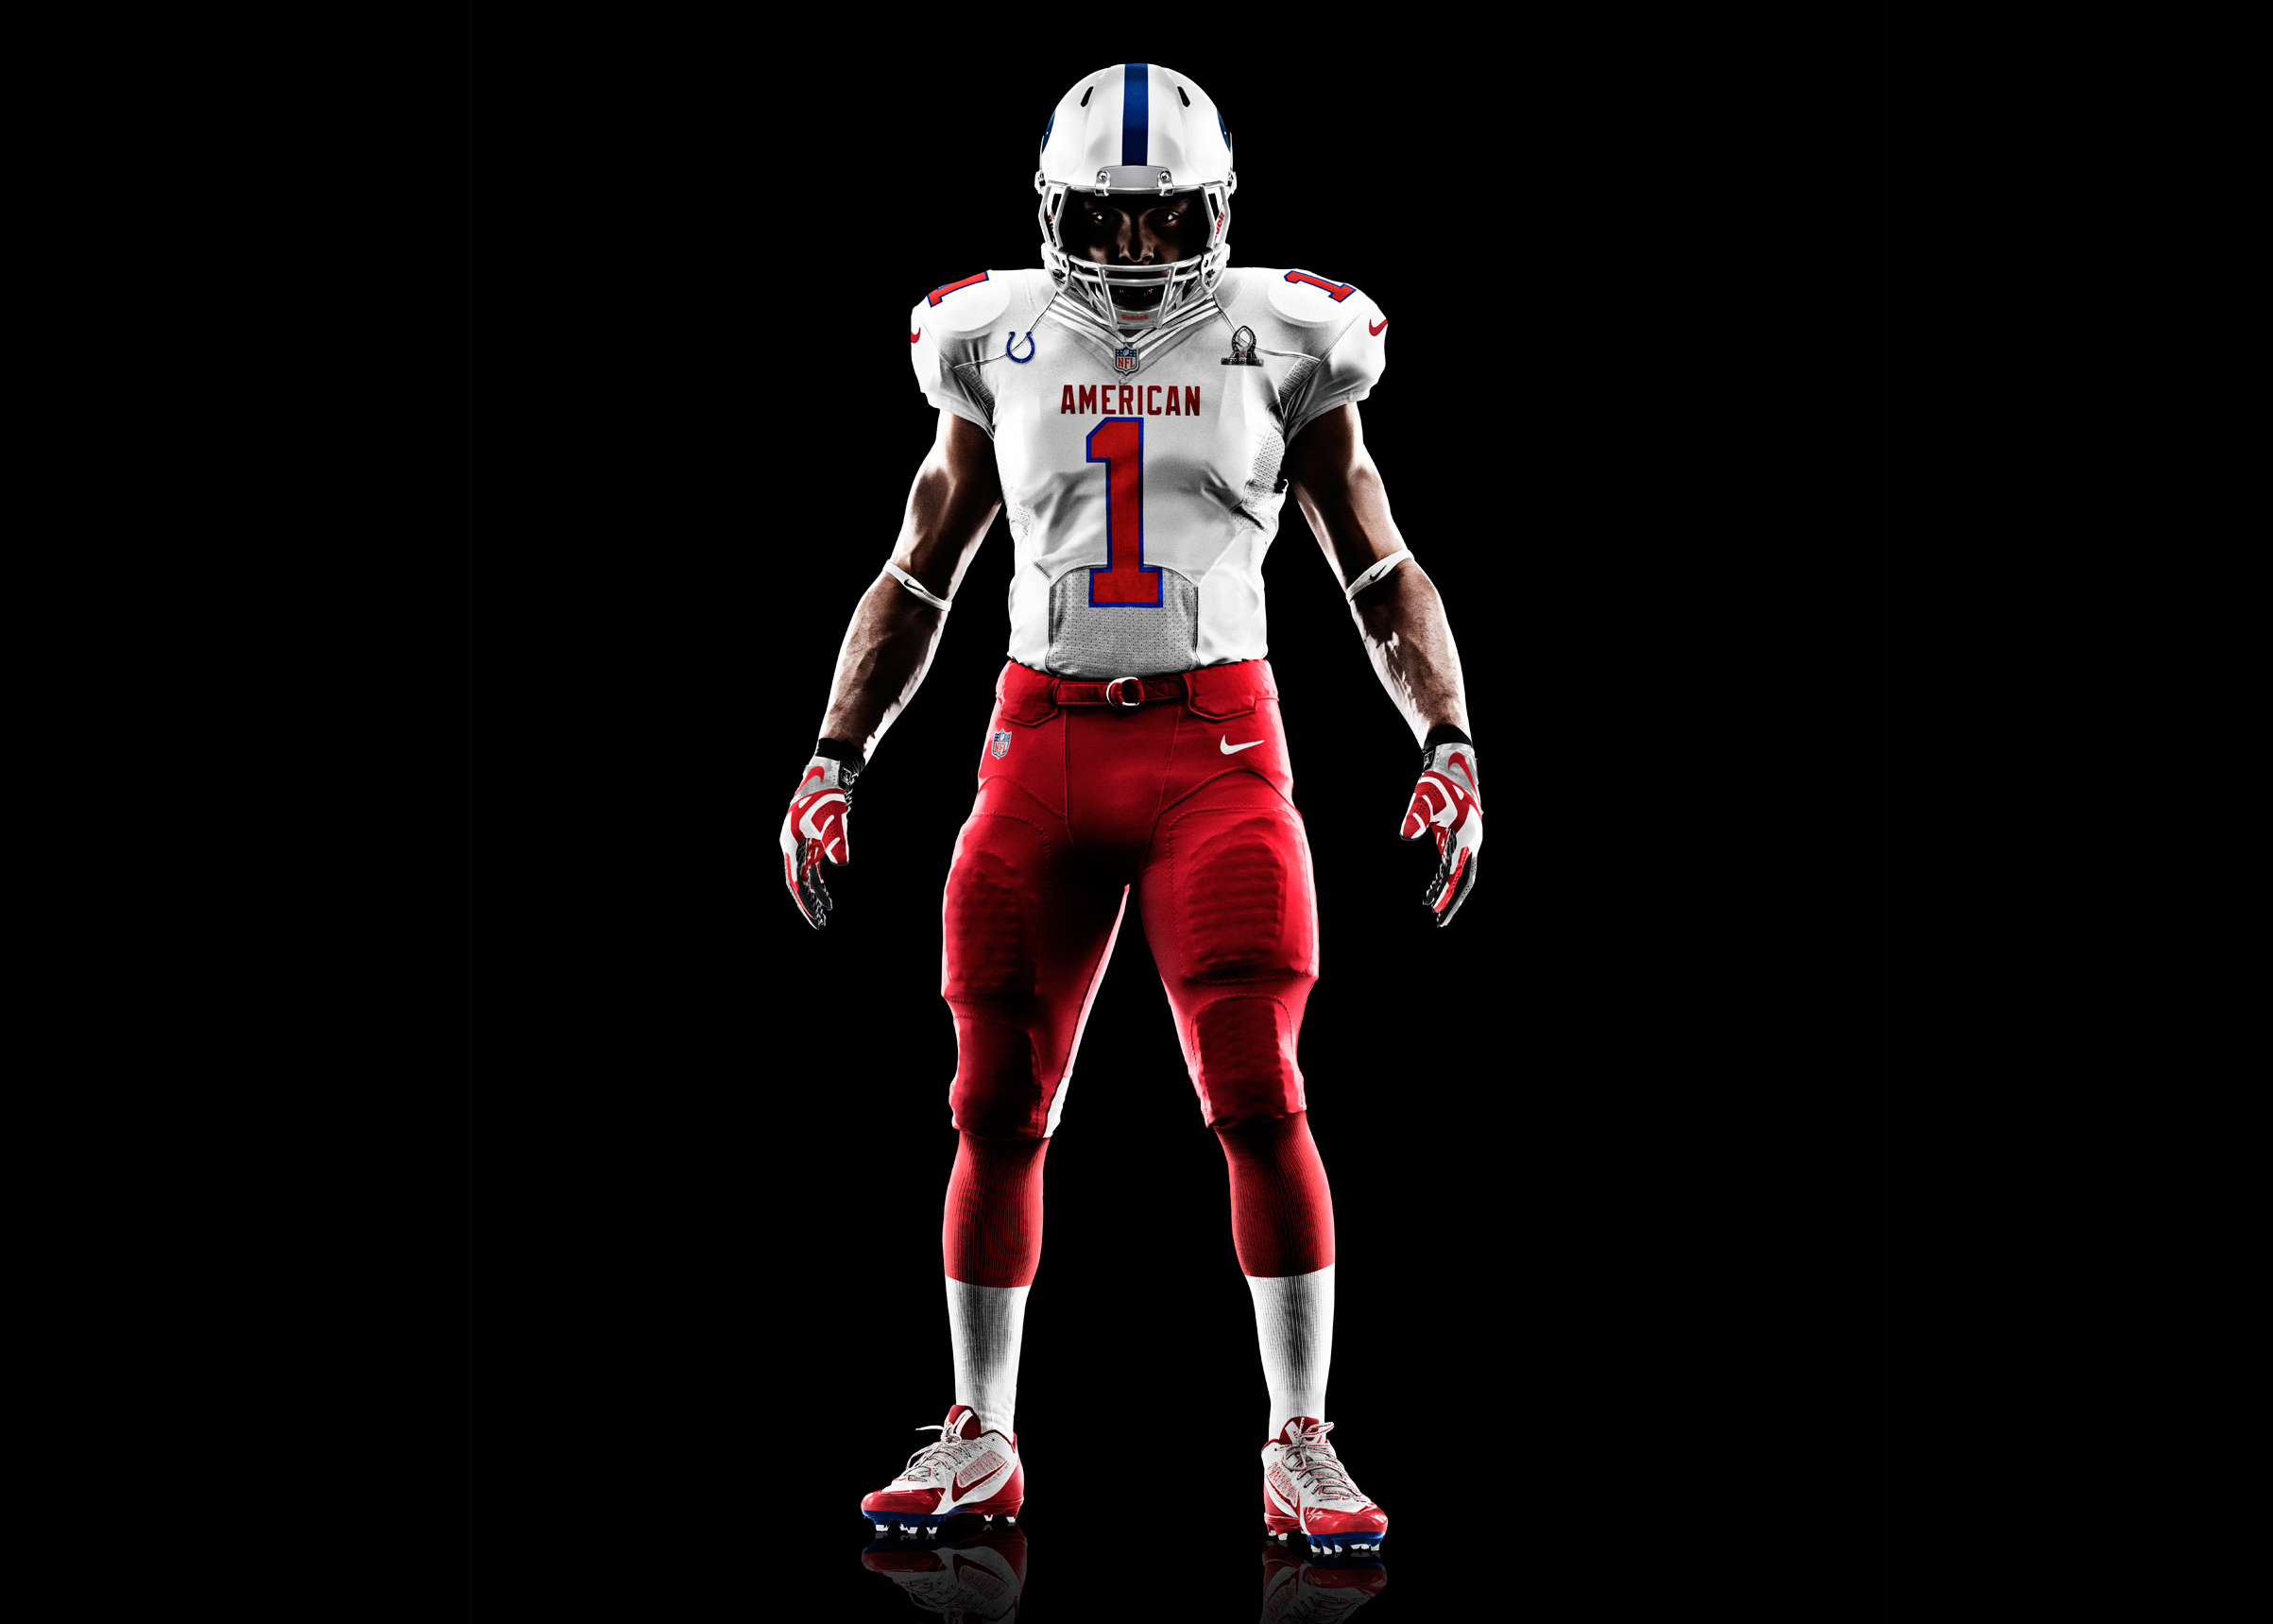 Nike unveils Pro Bowl uniforms for this Sunday But at the end of the day…